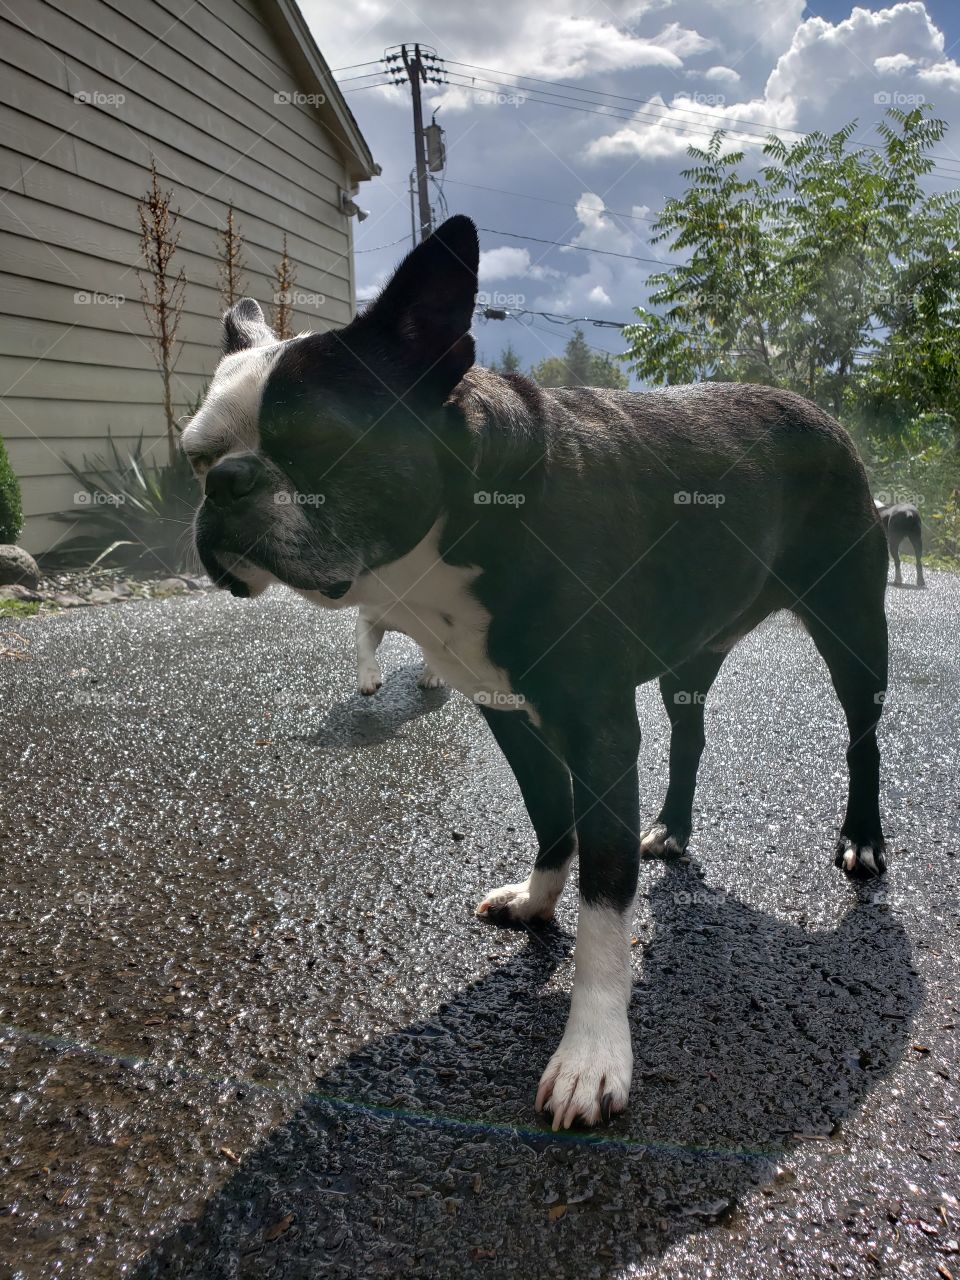 Stinky pete after the rain